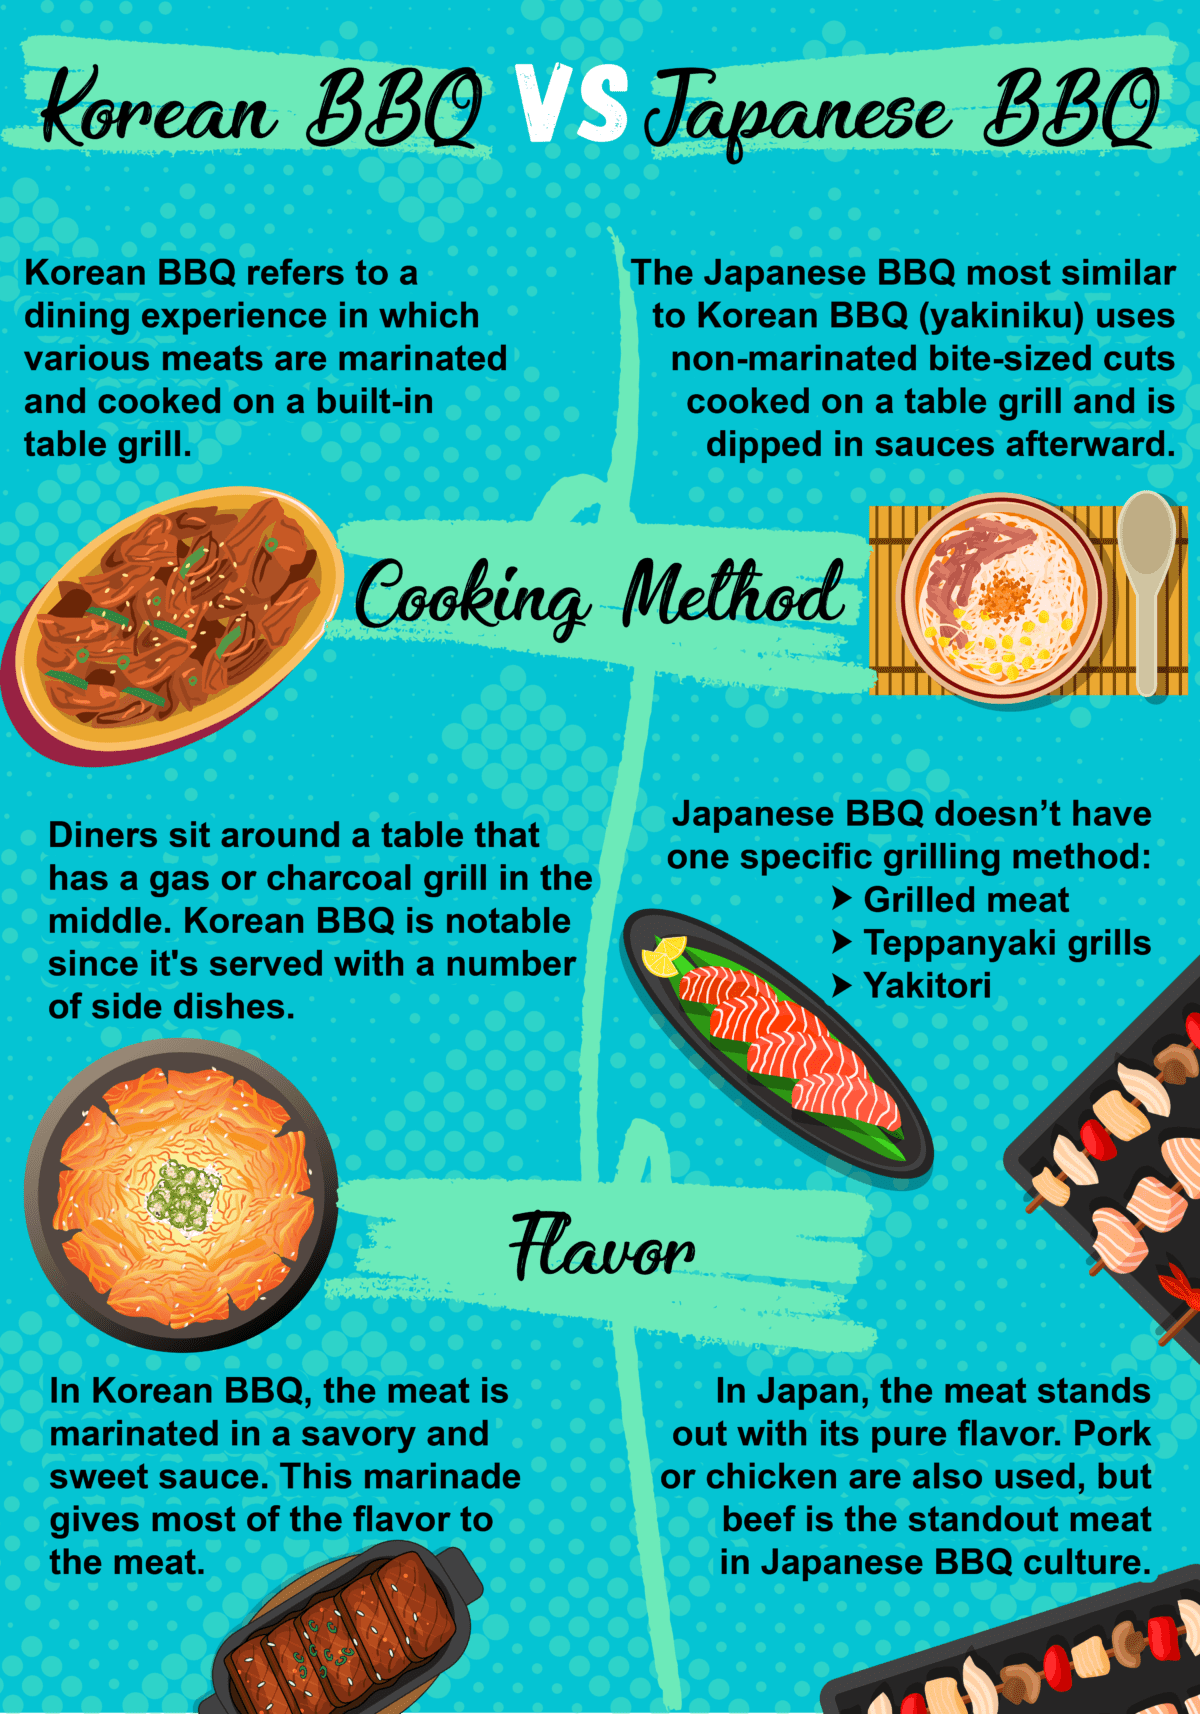 infographic comparing differences between Korean BBQ and Japanese BBQ